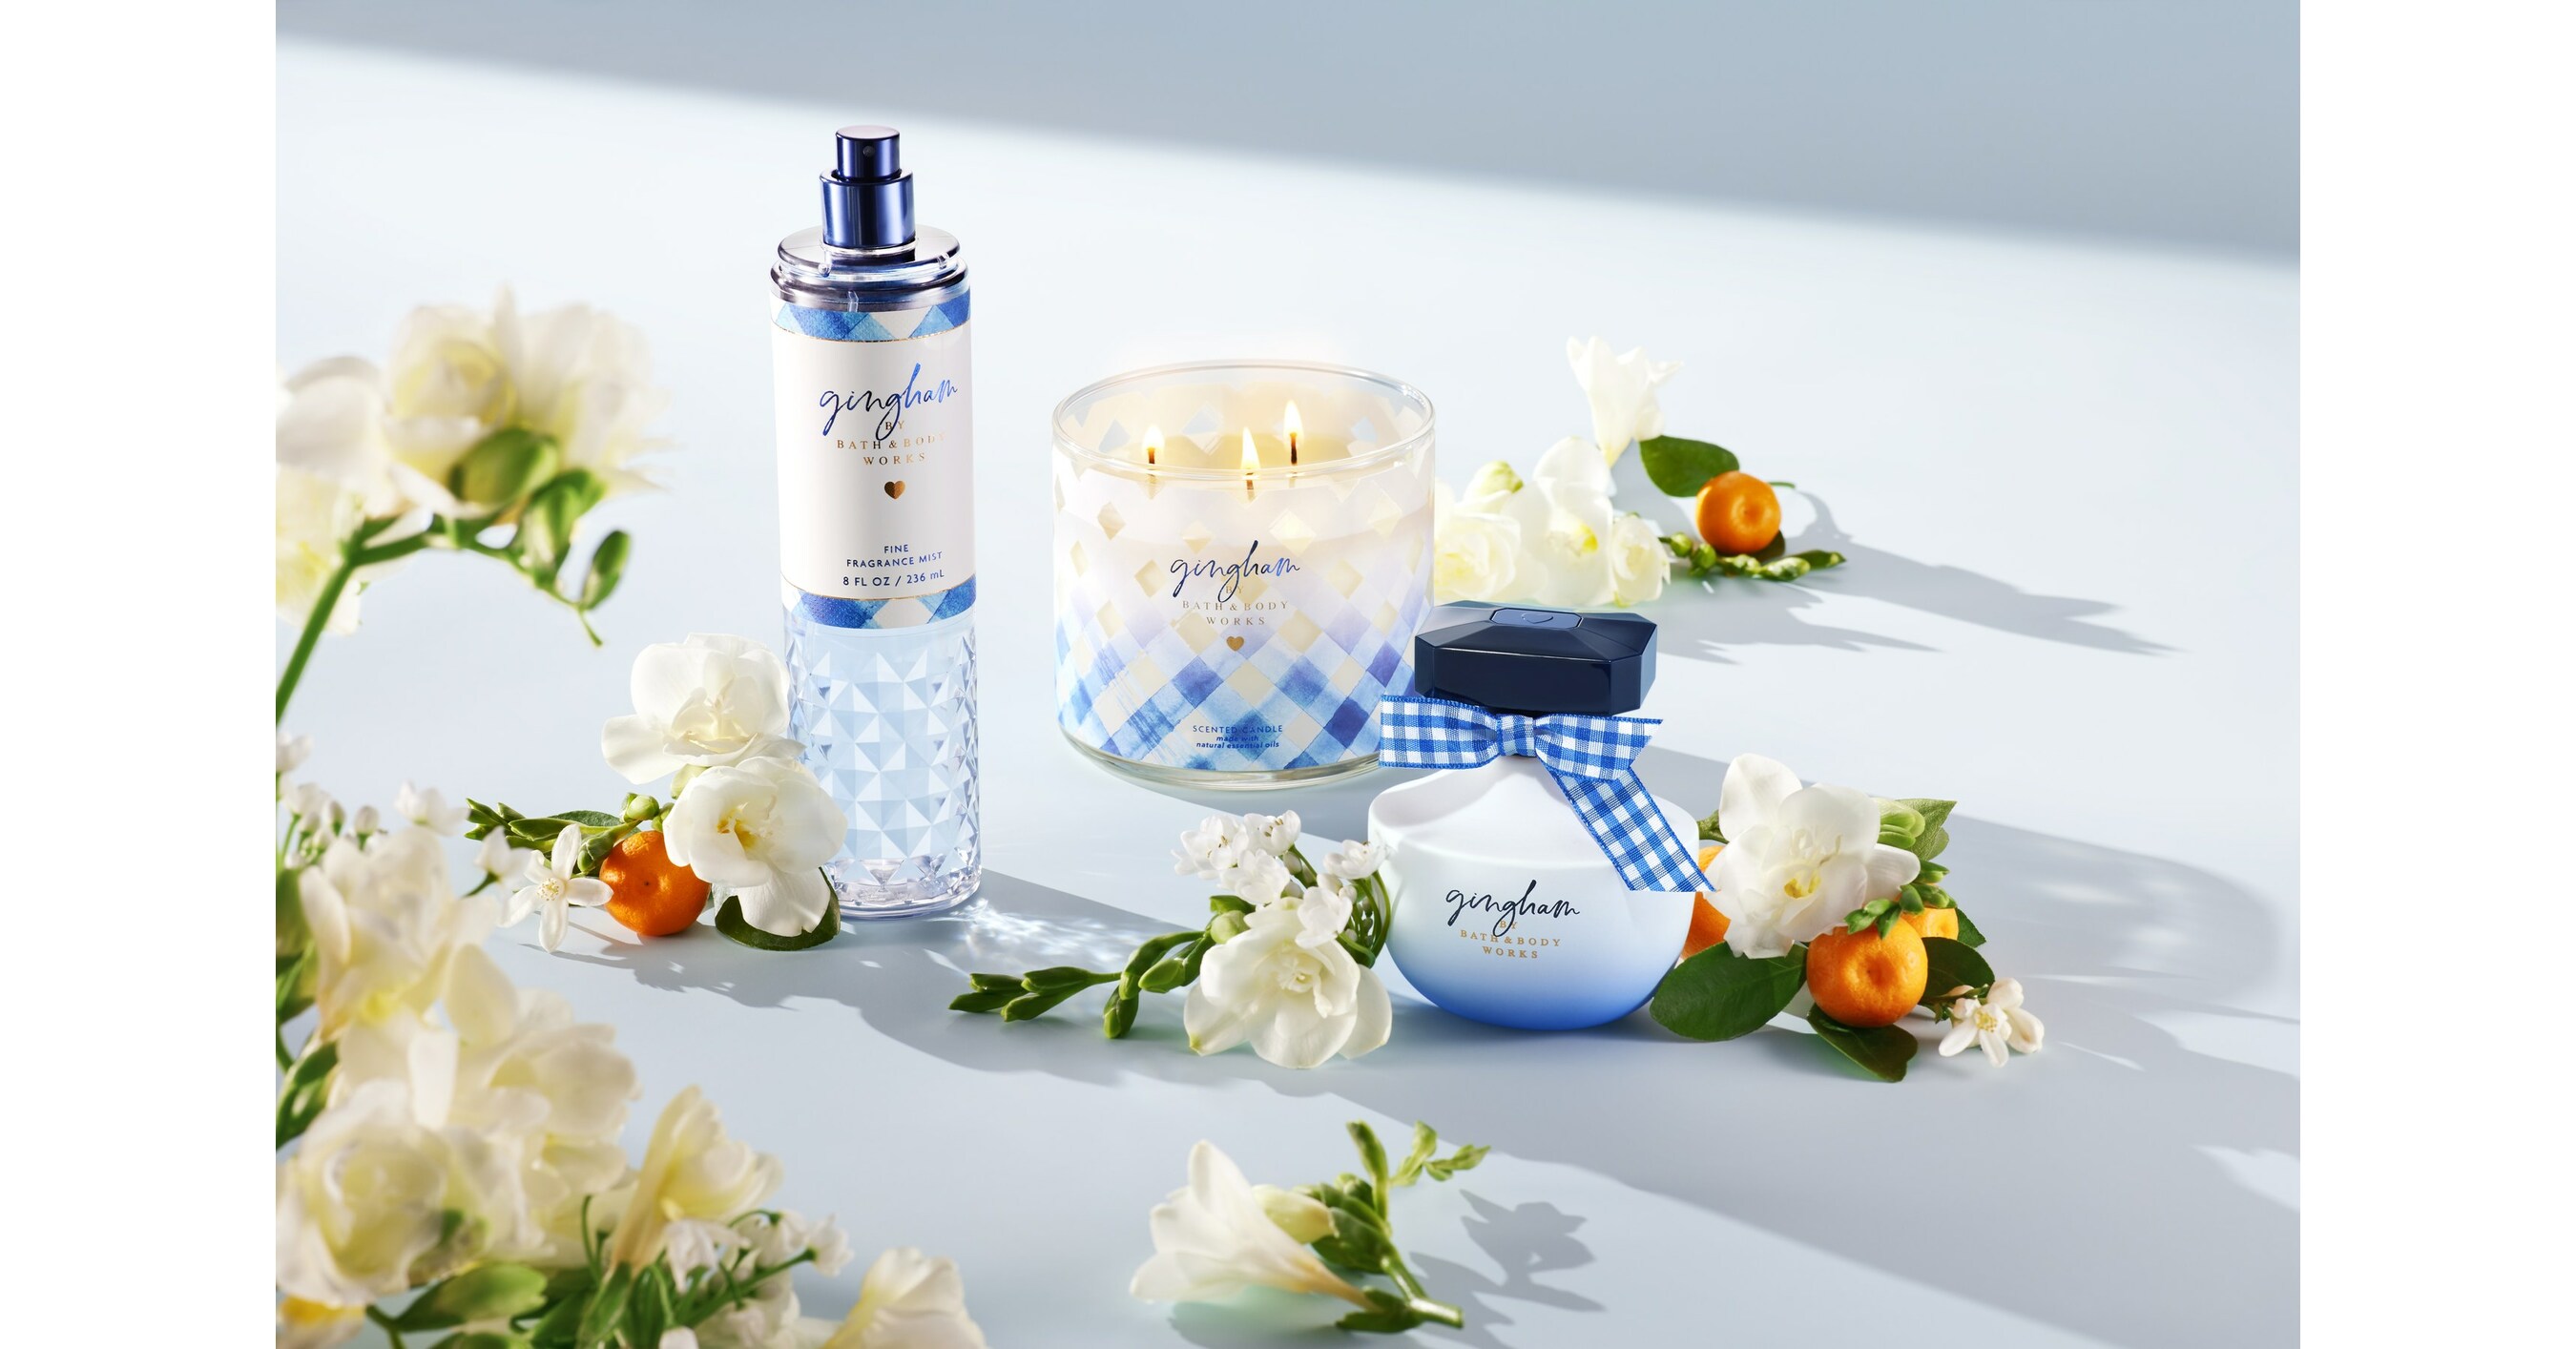 BATH & BODY WORKS ANNOUNCES LEGACY-INSPIRED LAUNCHES IN CELEBRATION OF  NATIONAL FRAGRANCE DAY